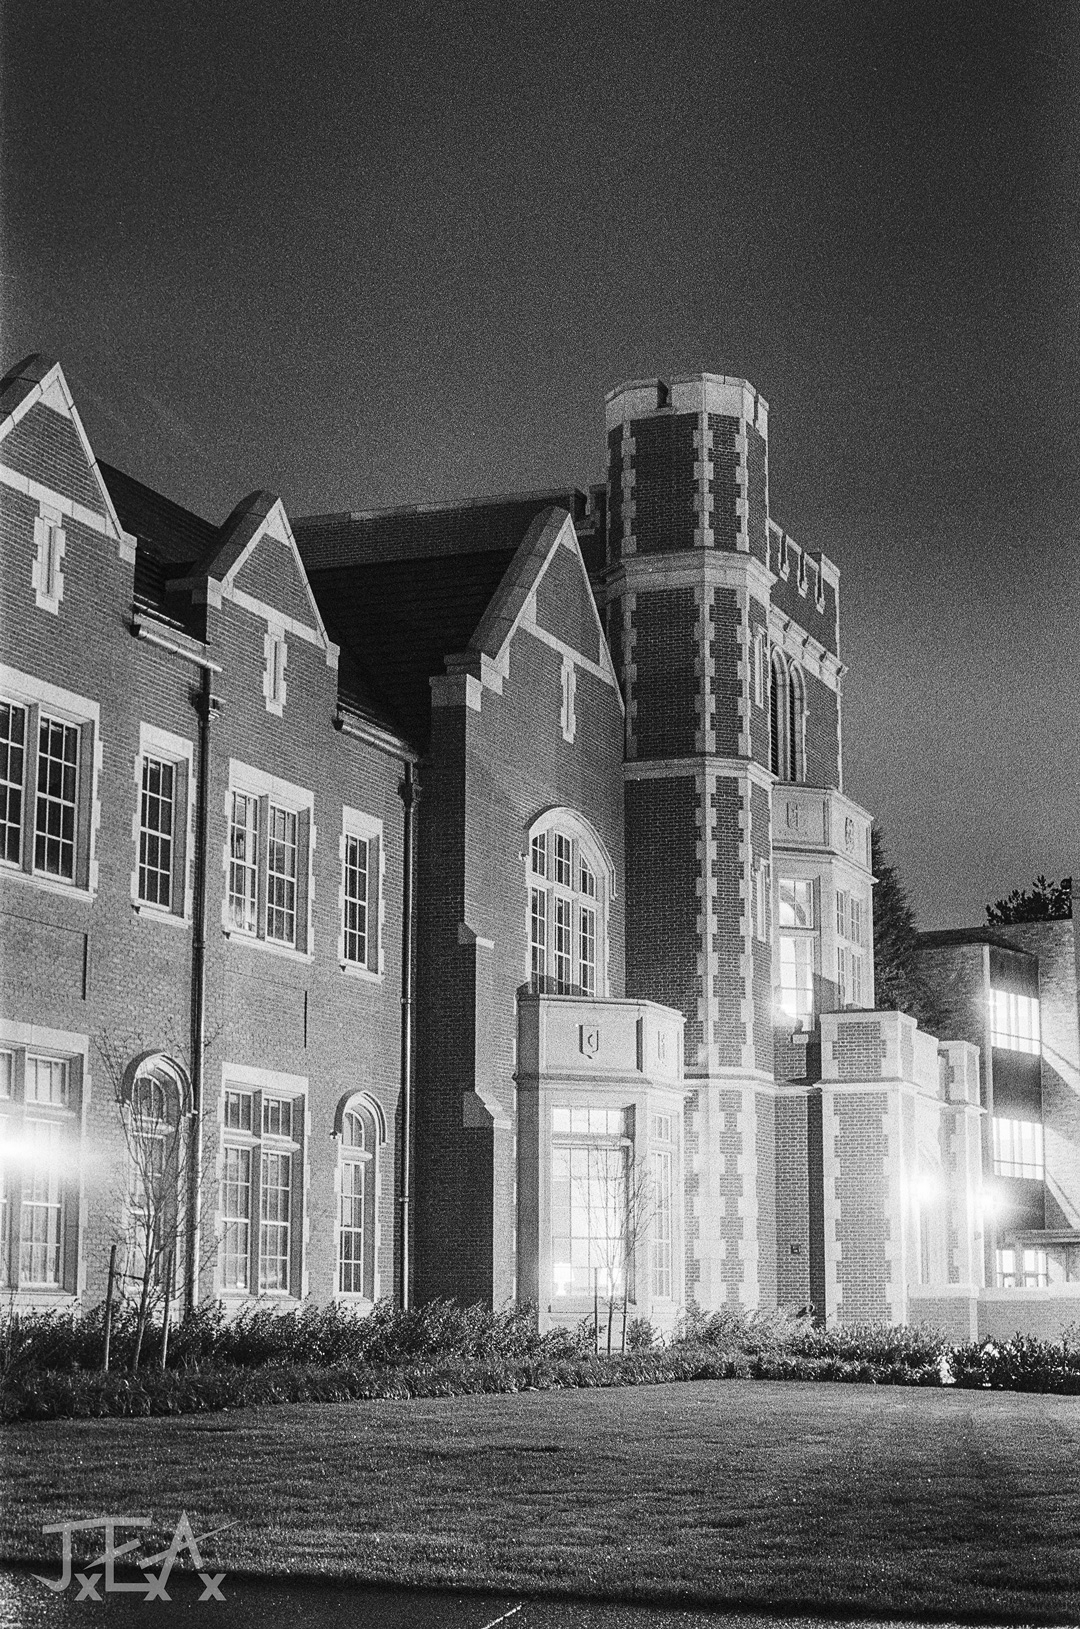 A black and white image of the University of Portland at night.